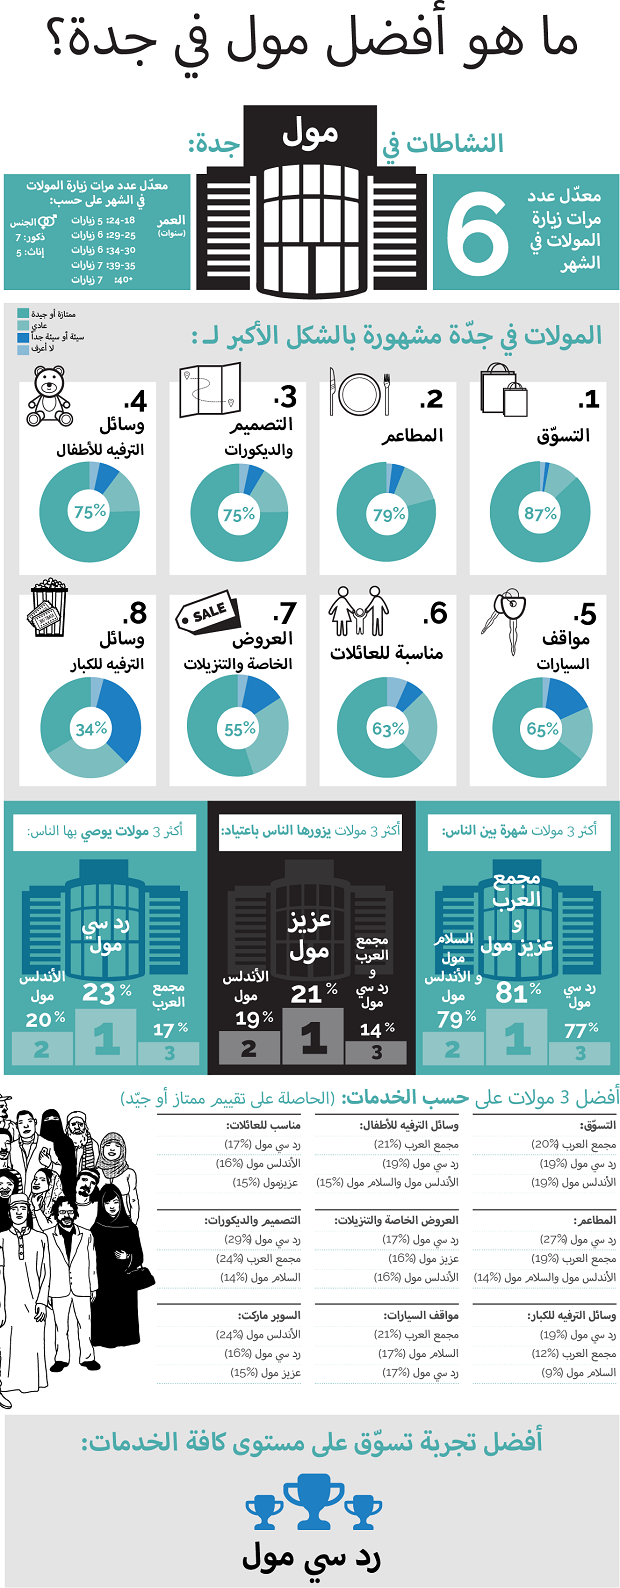 Infographic: Which mall in Jeddah provides the best shopper experience?